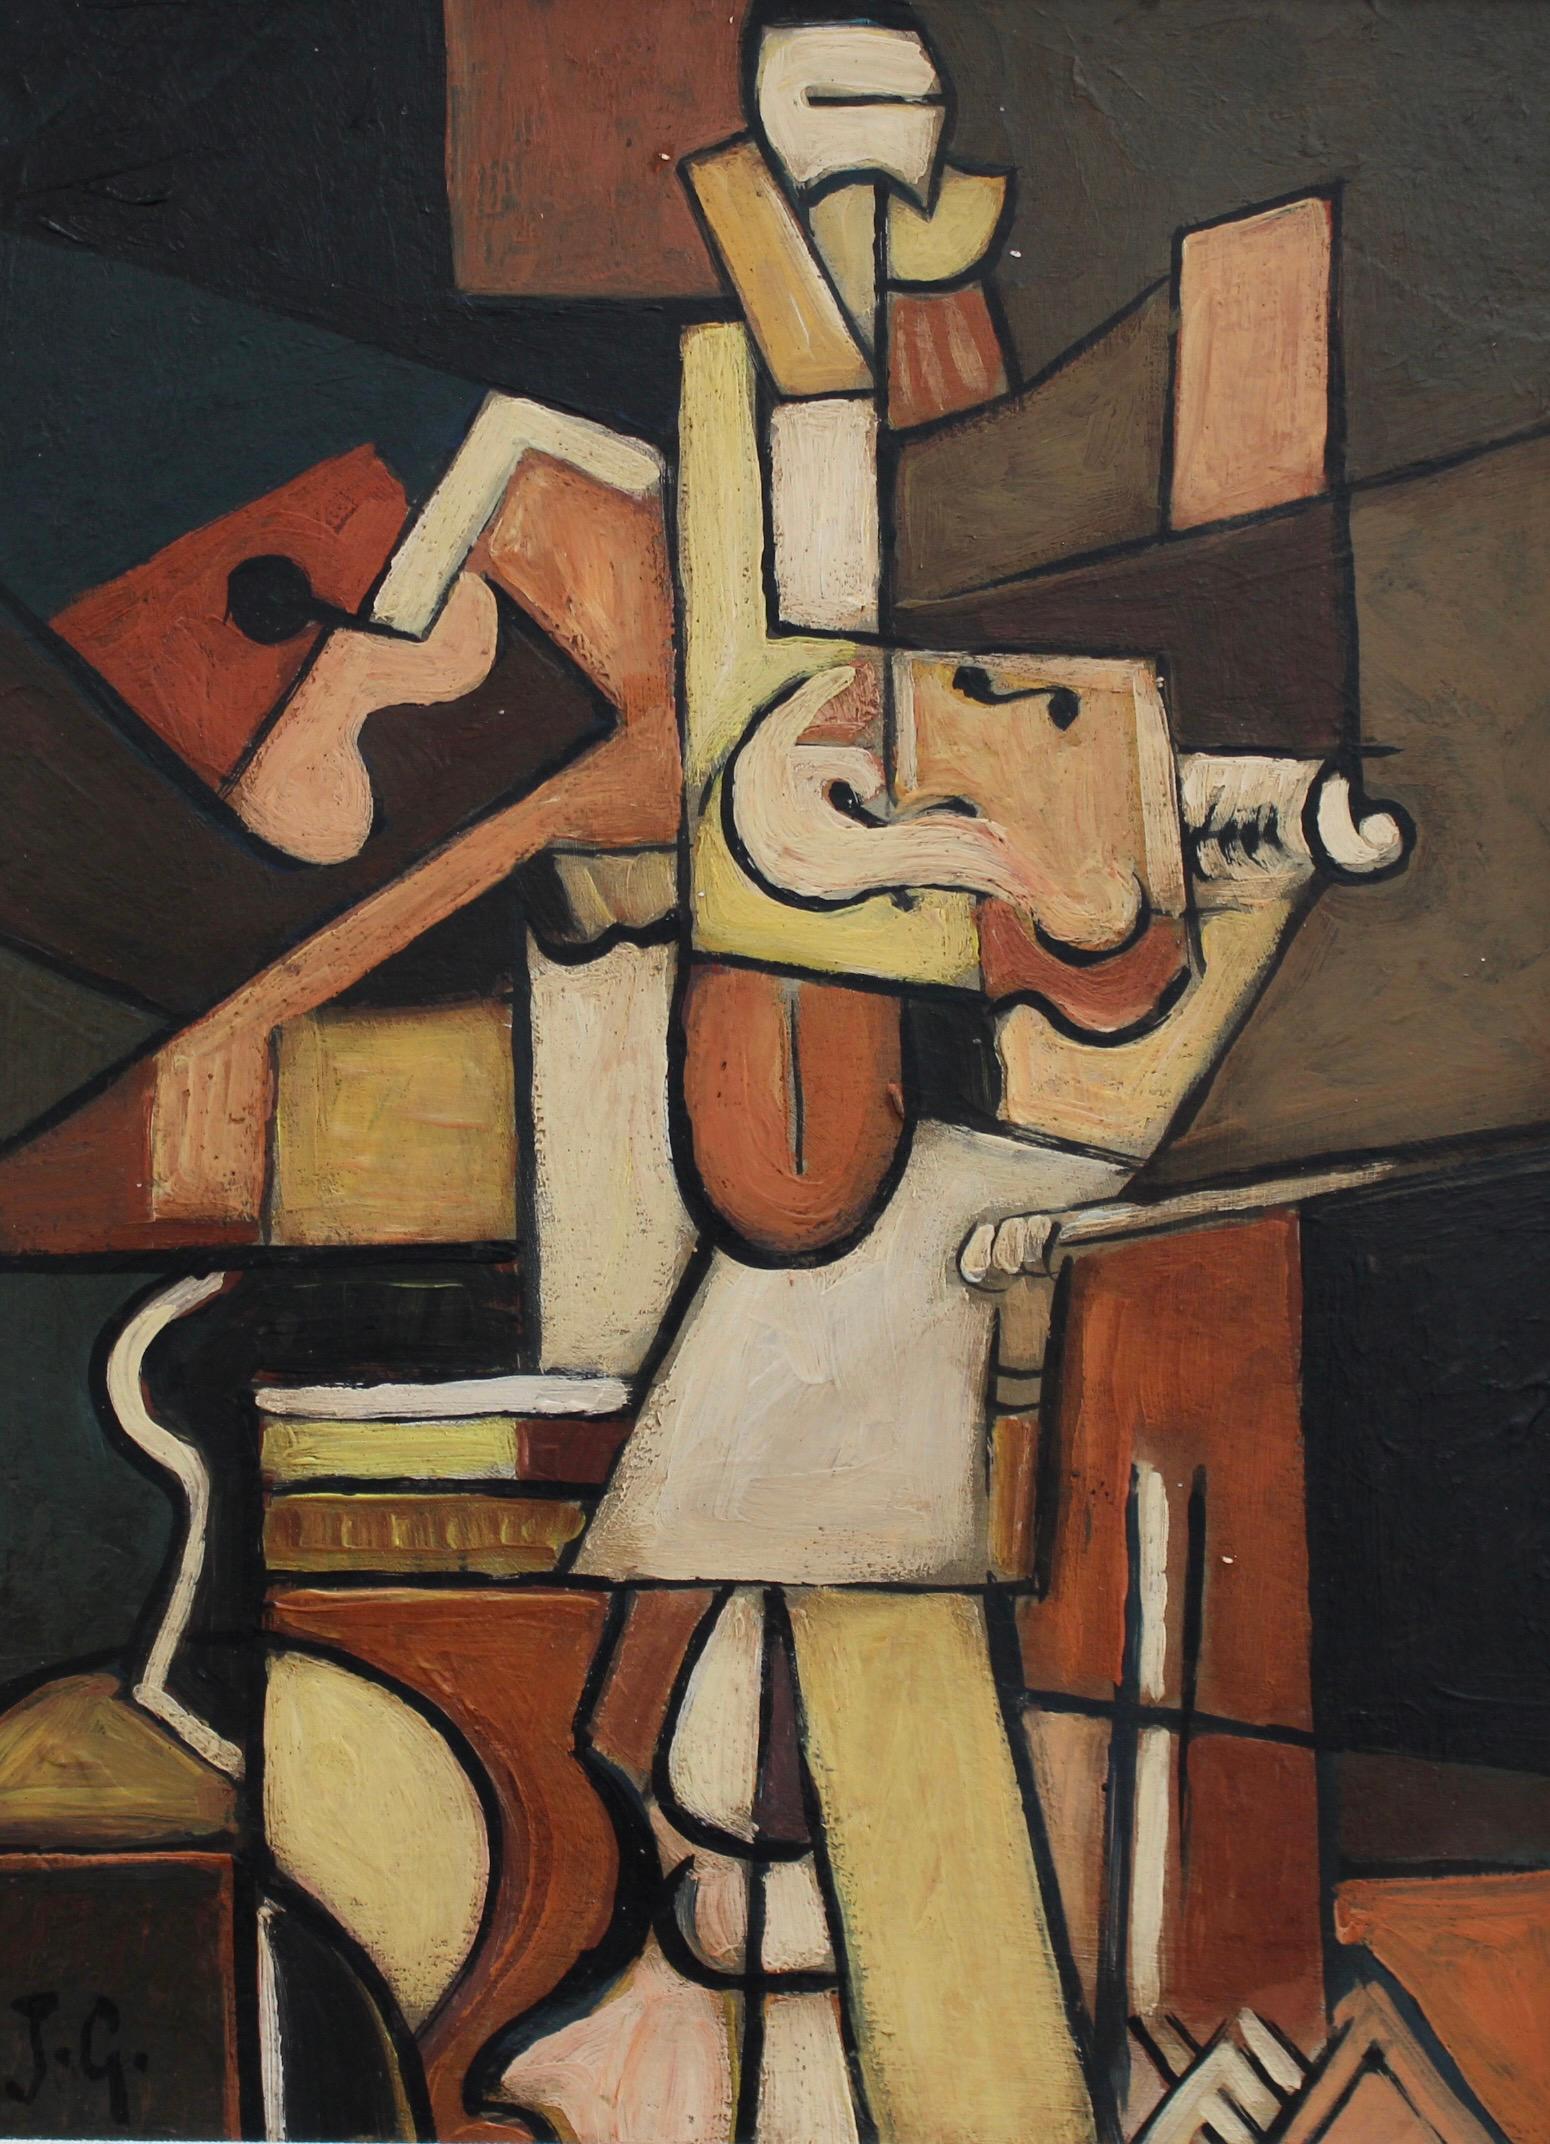 'The Violinist' by J.G.  - Cubist Painting by Unknown